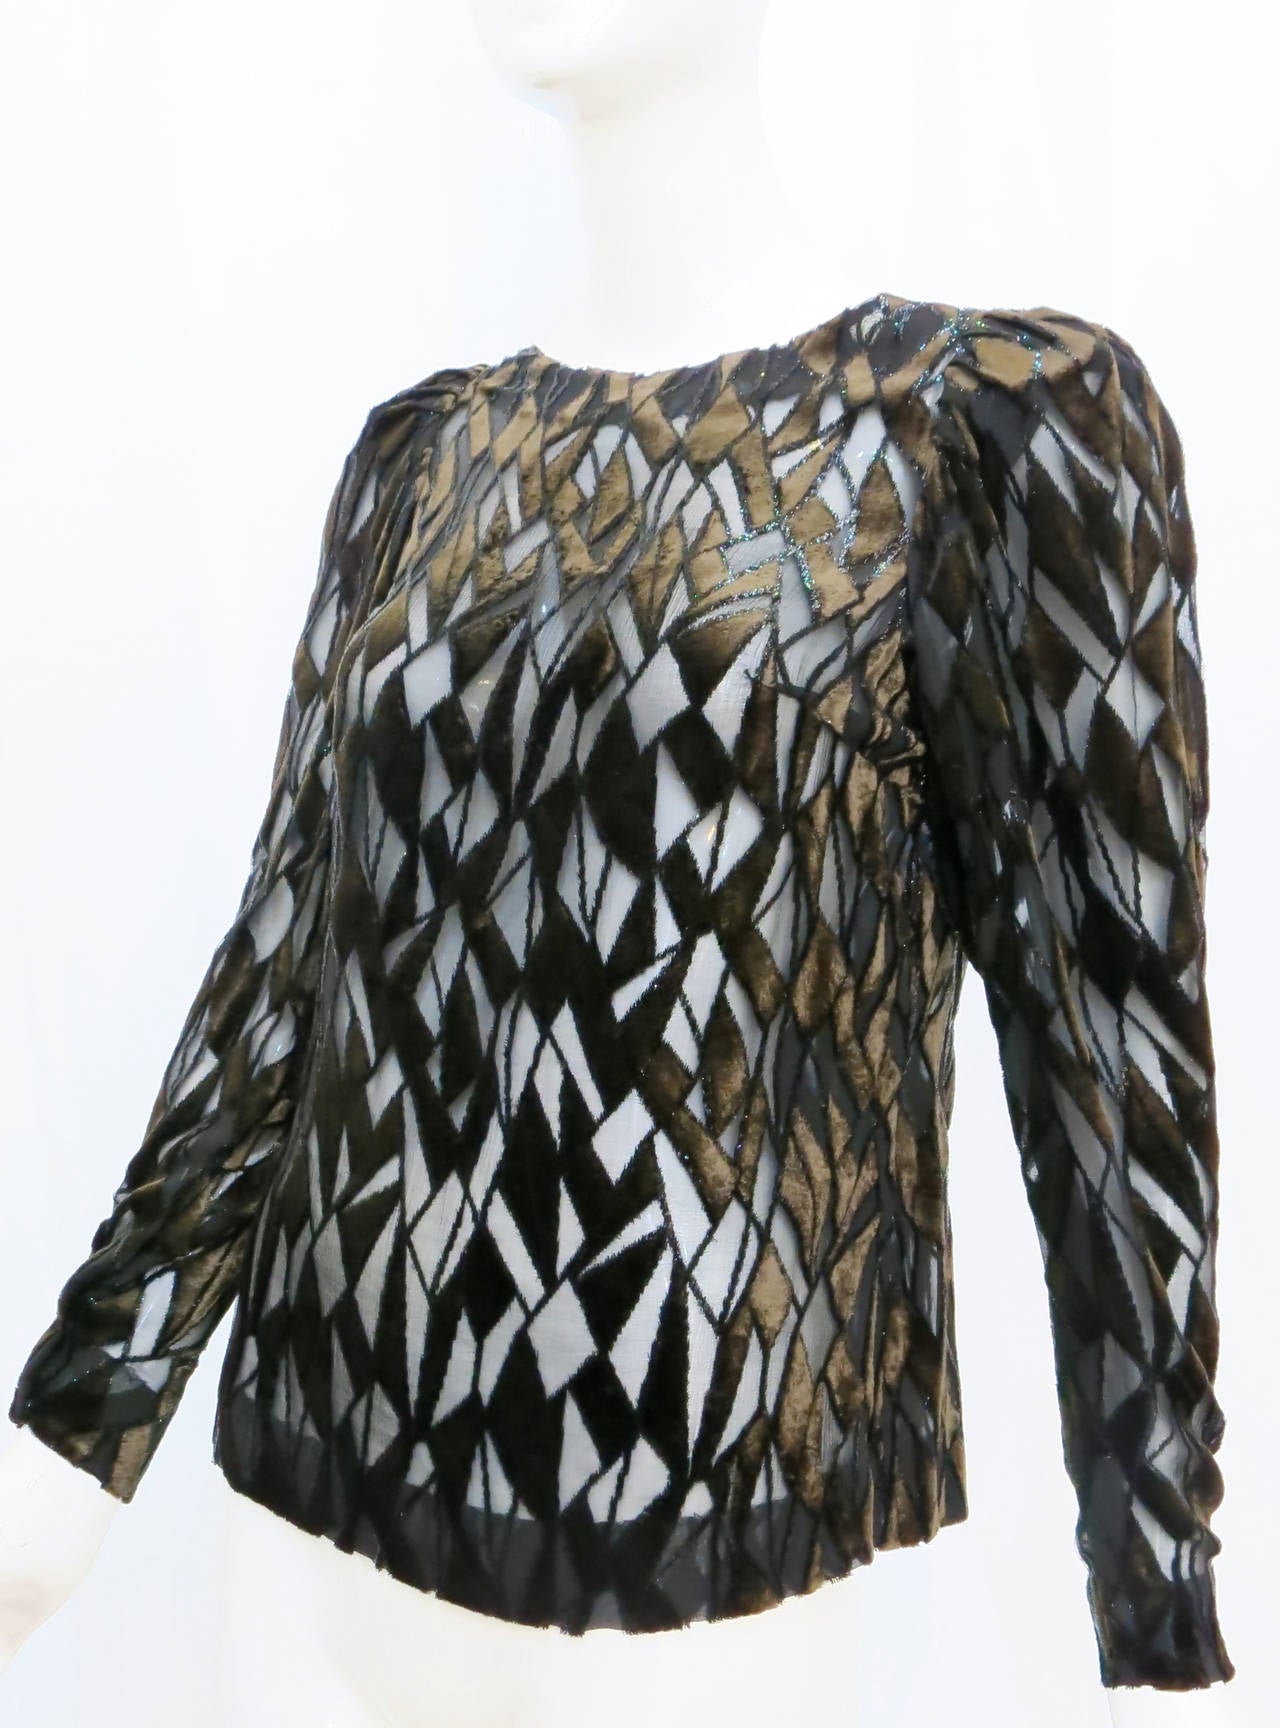 Perhaps from his start as a milliner, designer Adolfo Sardina understands attention to detail. This 1980s sheer blouse with a stained glass pattern of black and brown velvet offers refinement with self-assured sensuality. This tops zips up the back